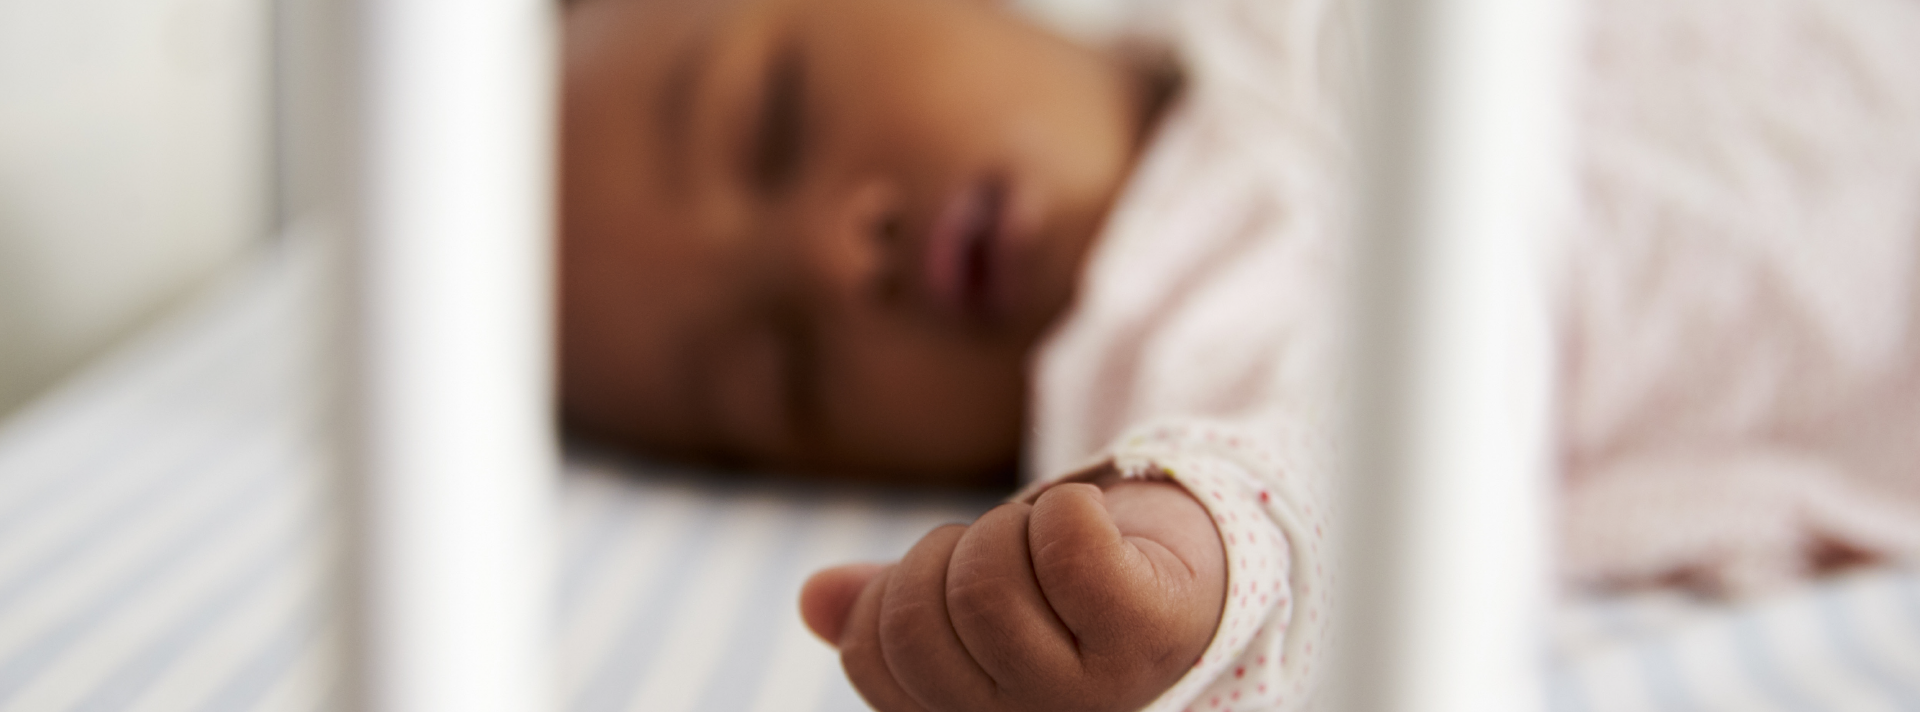 Safe Sleep – Cribs and Infant Products